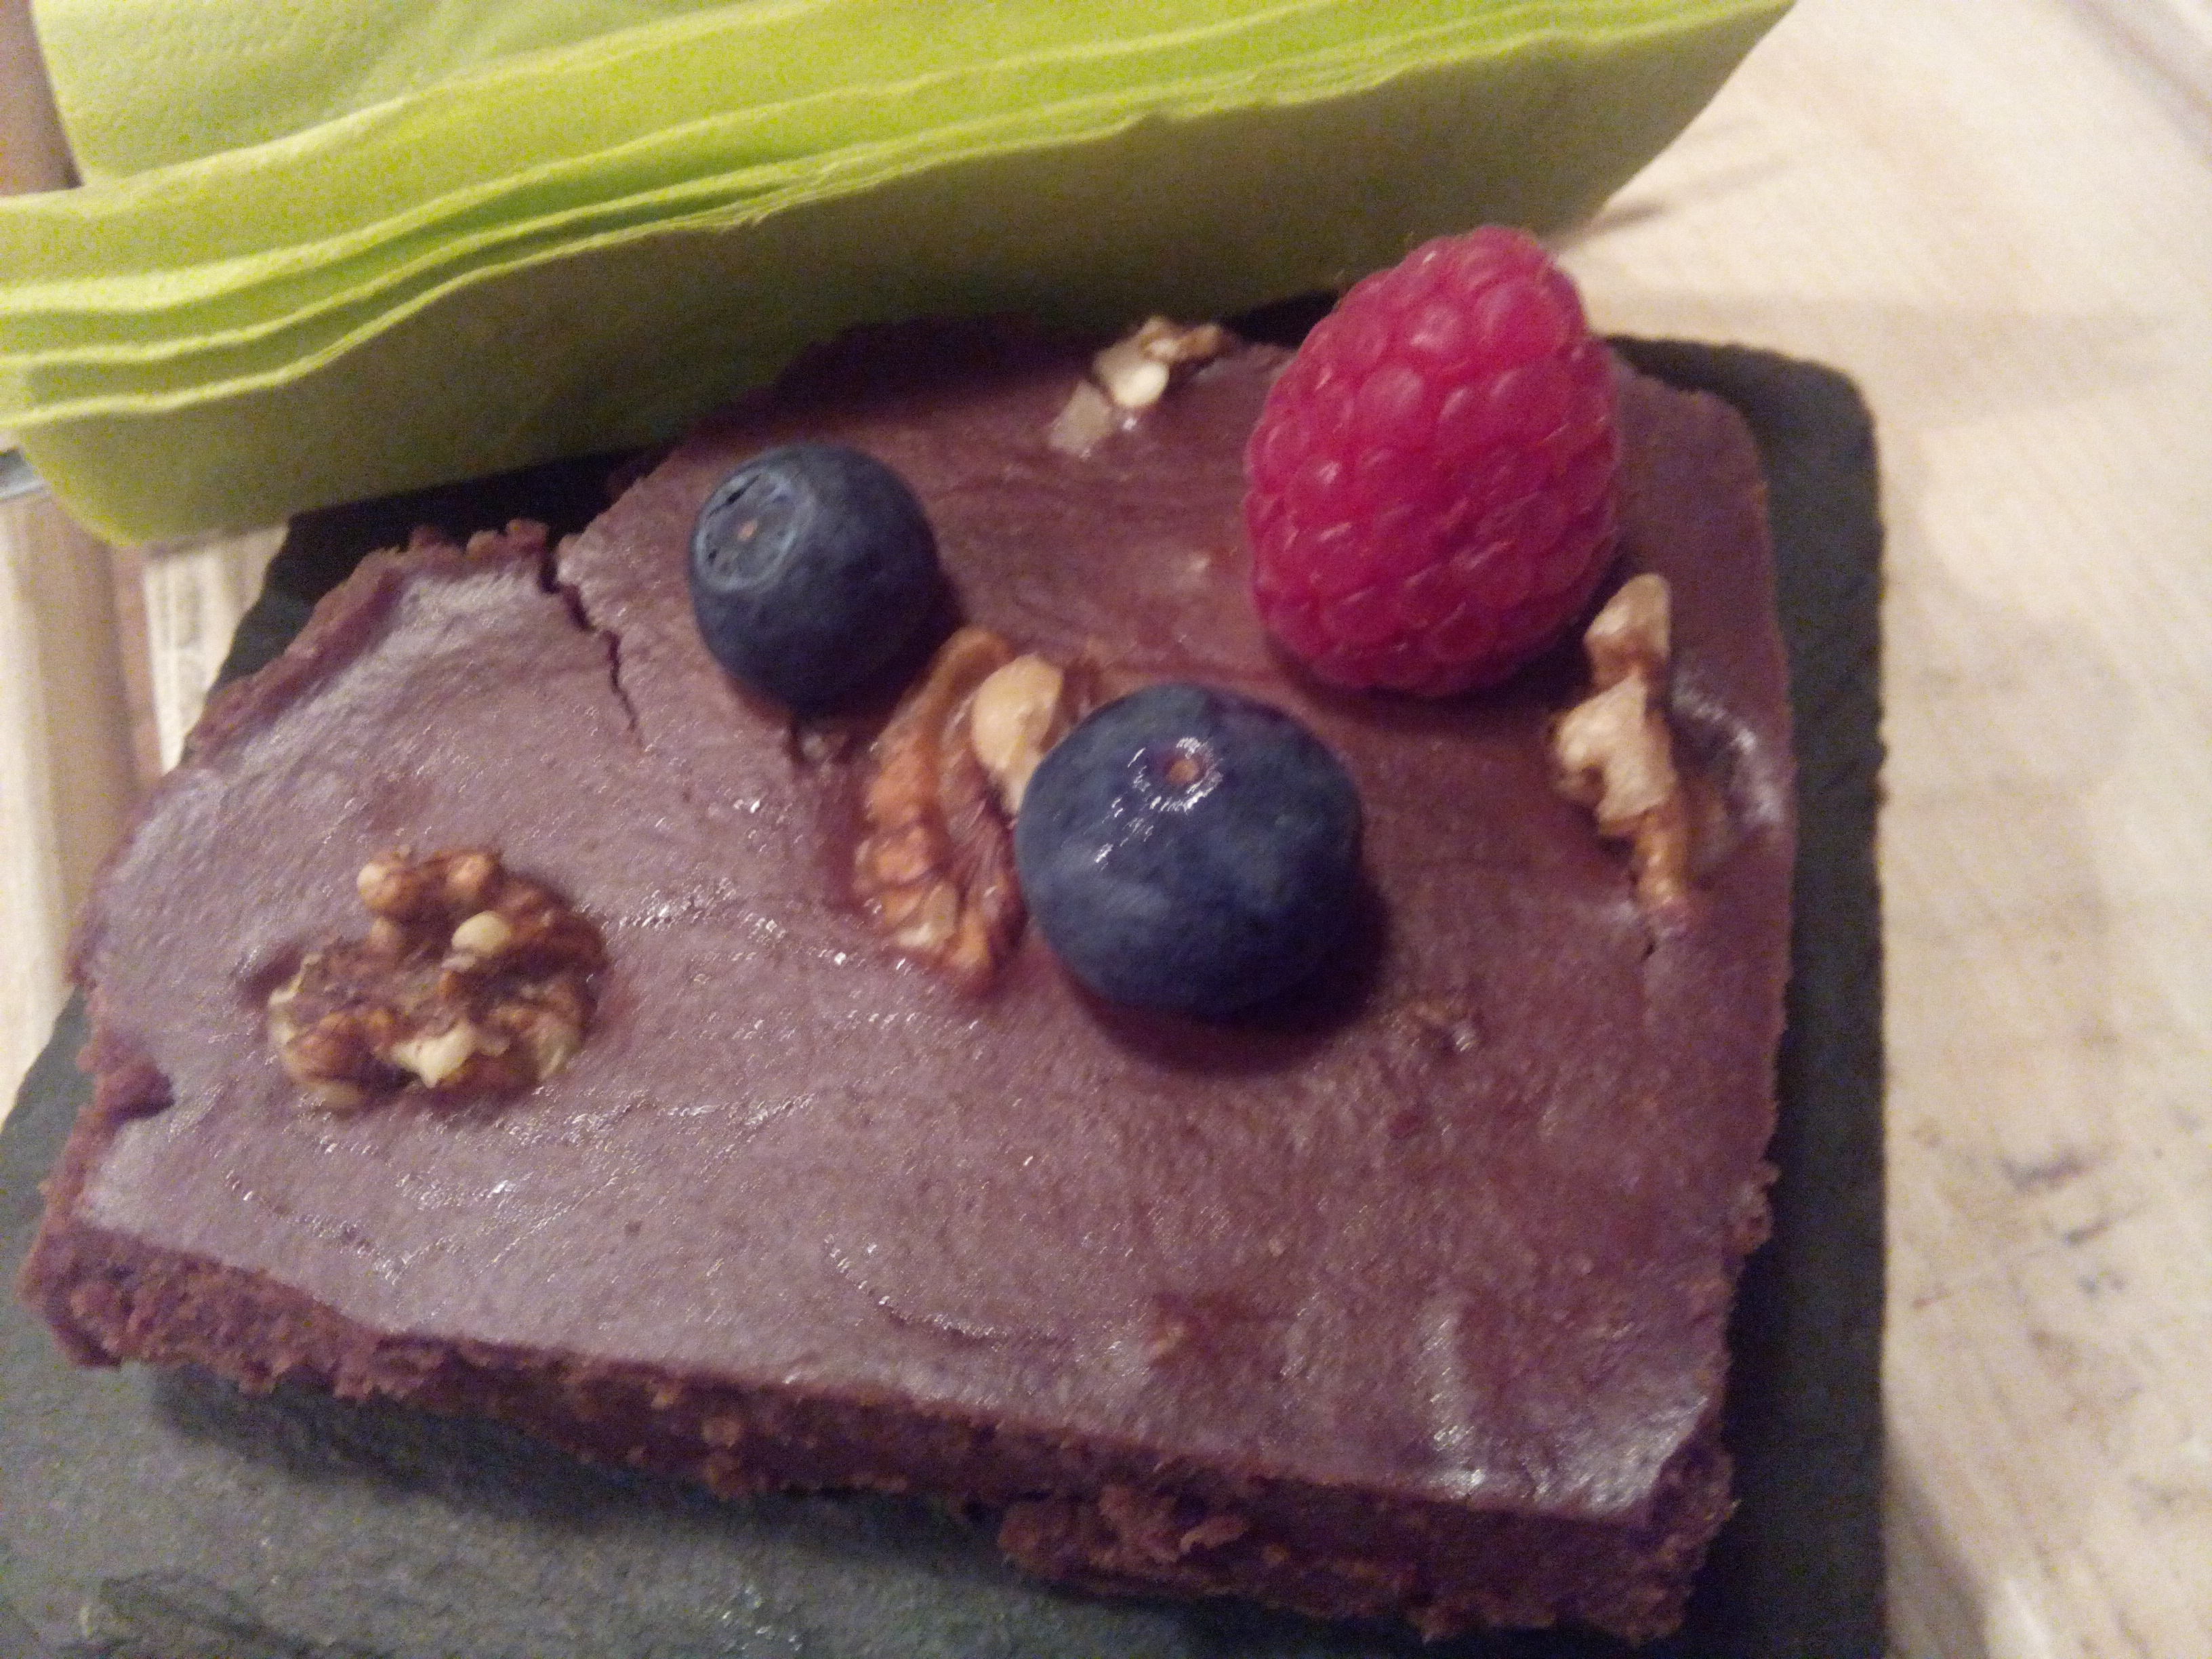 A chocolate cake with nuts, blueberries and a raspberry on top